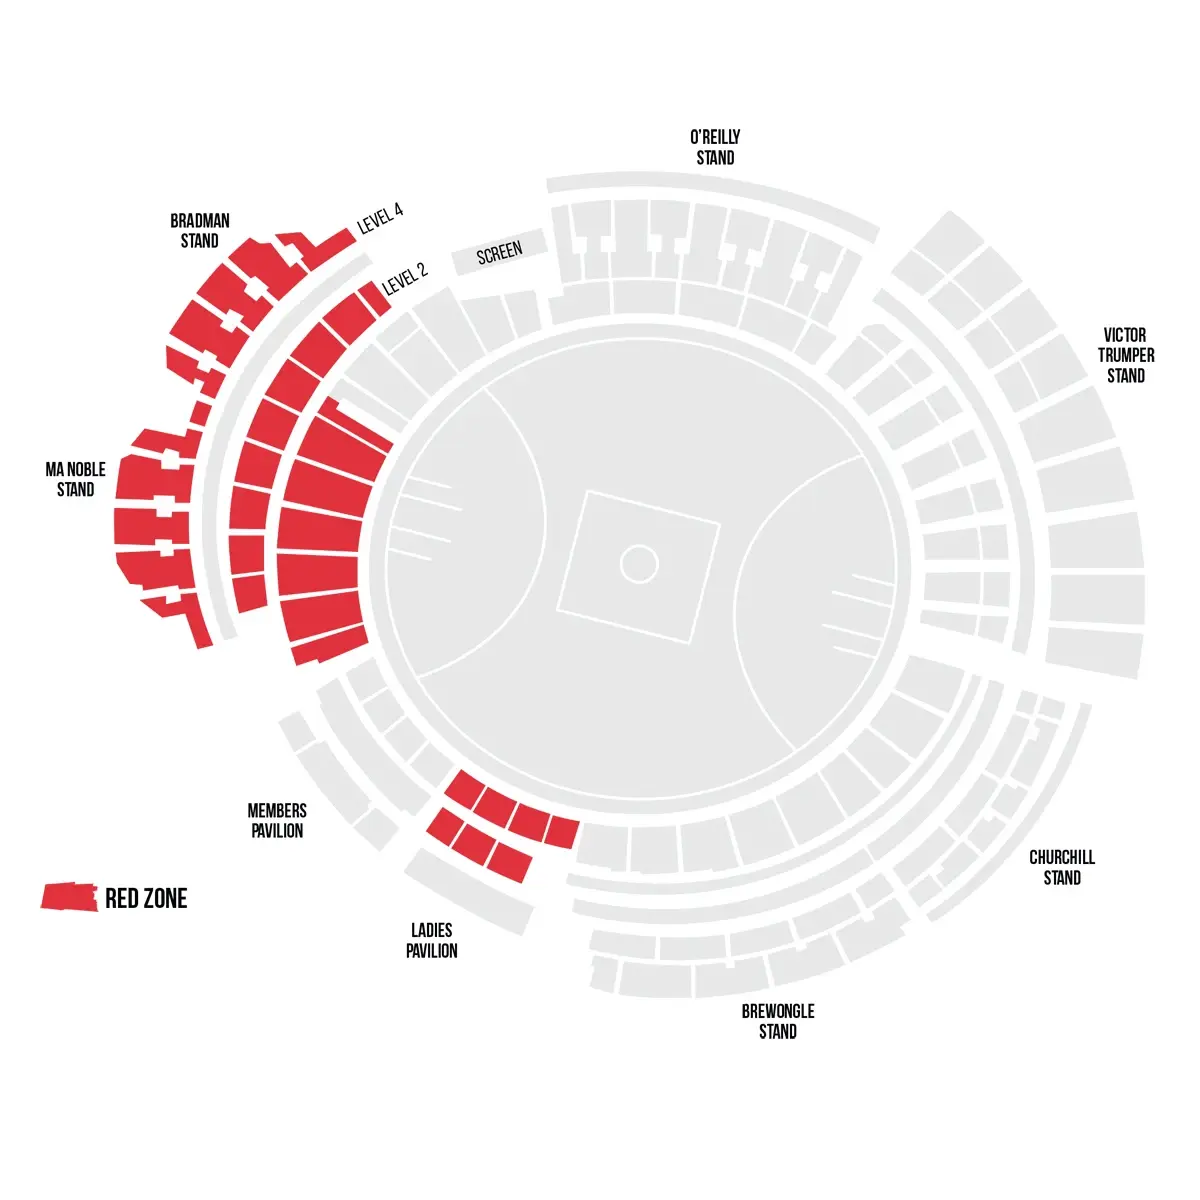 Red Zone seating map